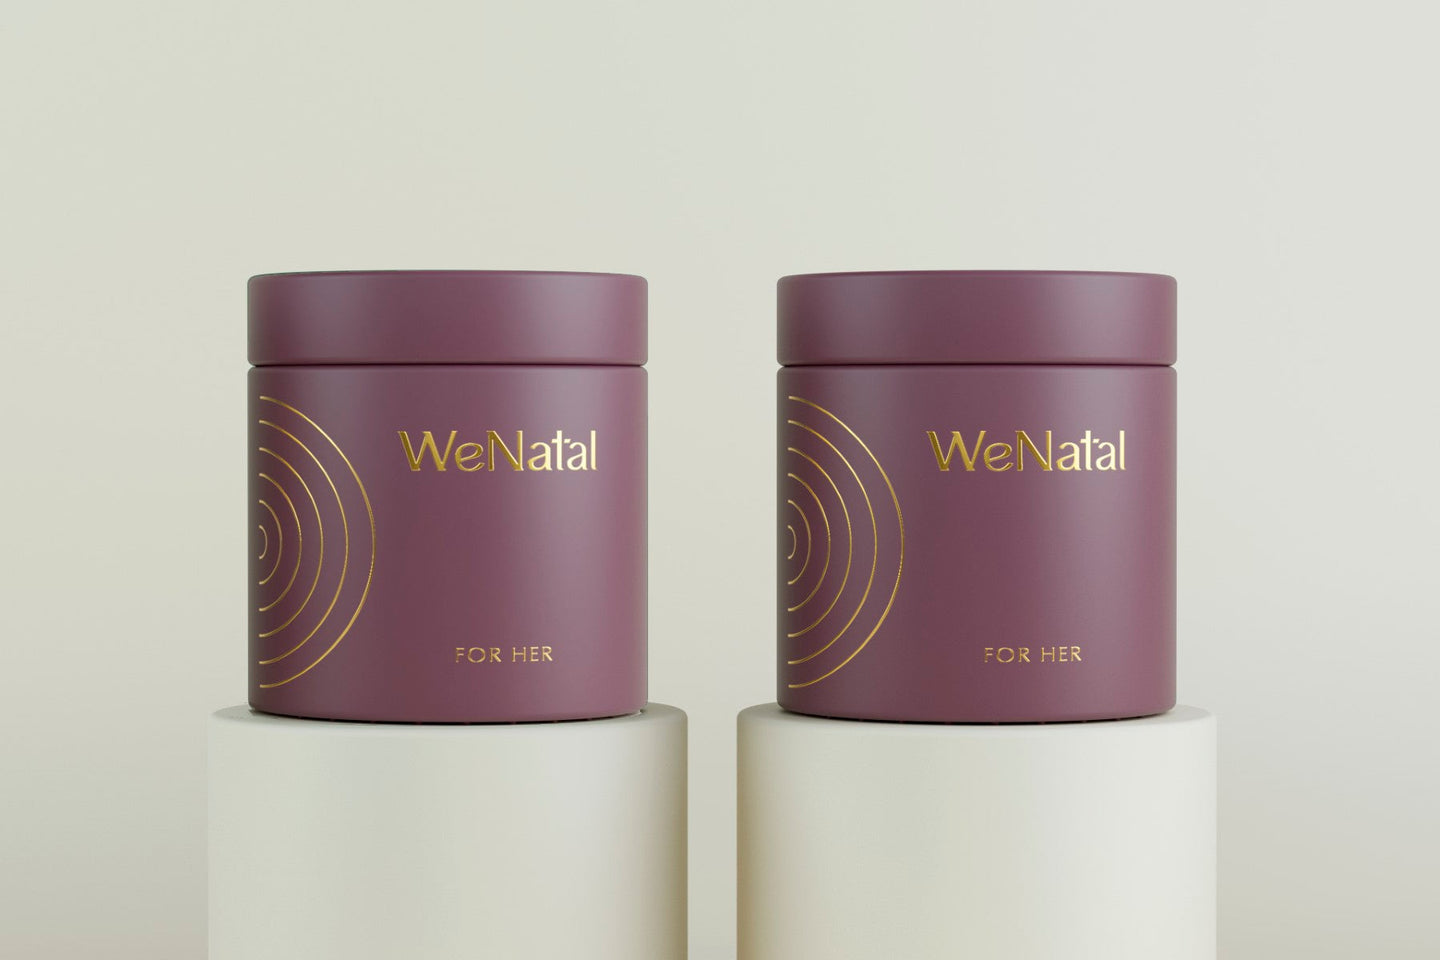 Two WeNatal For Her glass jars side by side on pedistals on a white background